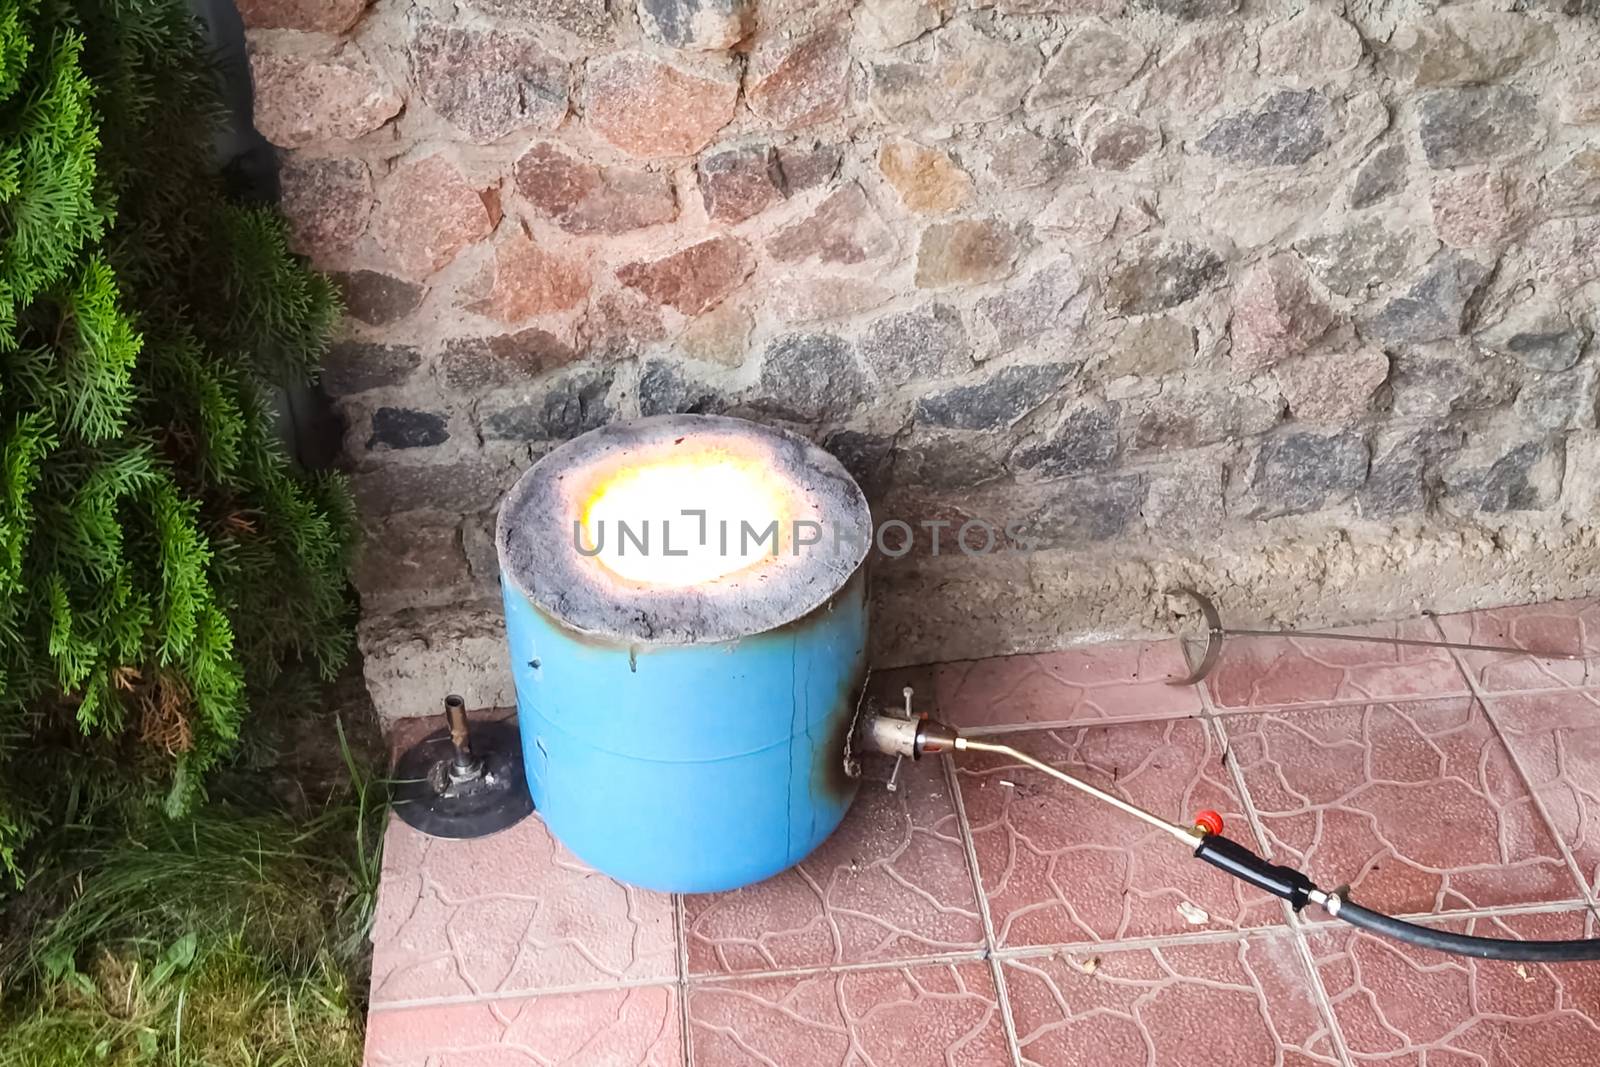 homemade metal smelter. Melting metals at home. by DePo